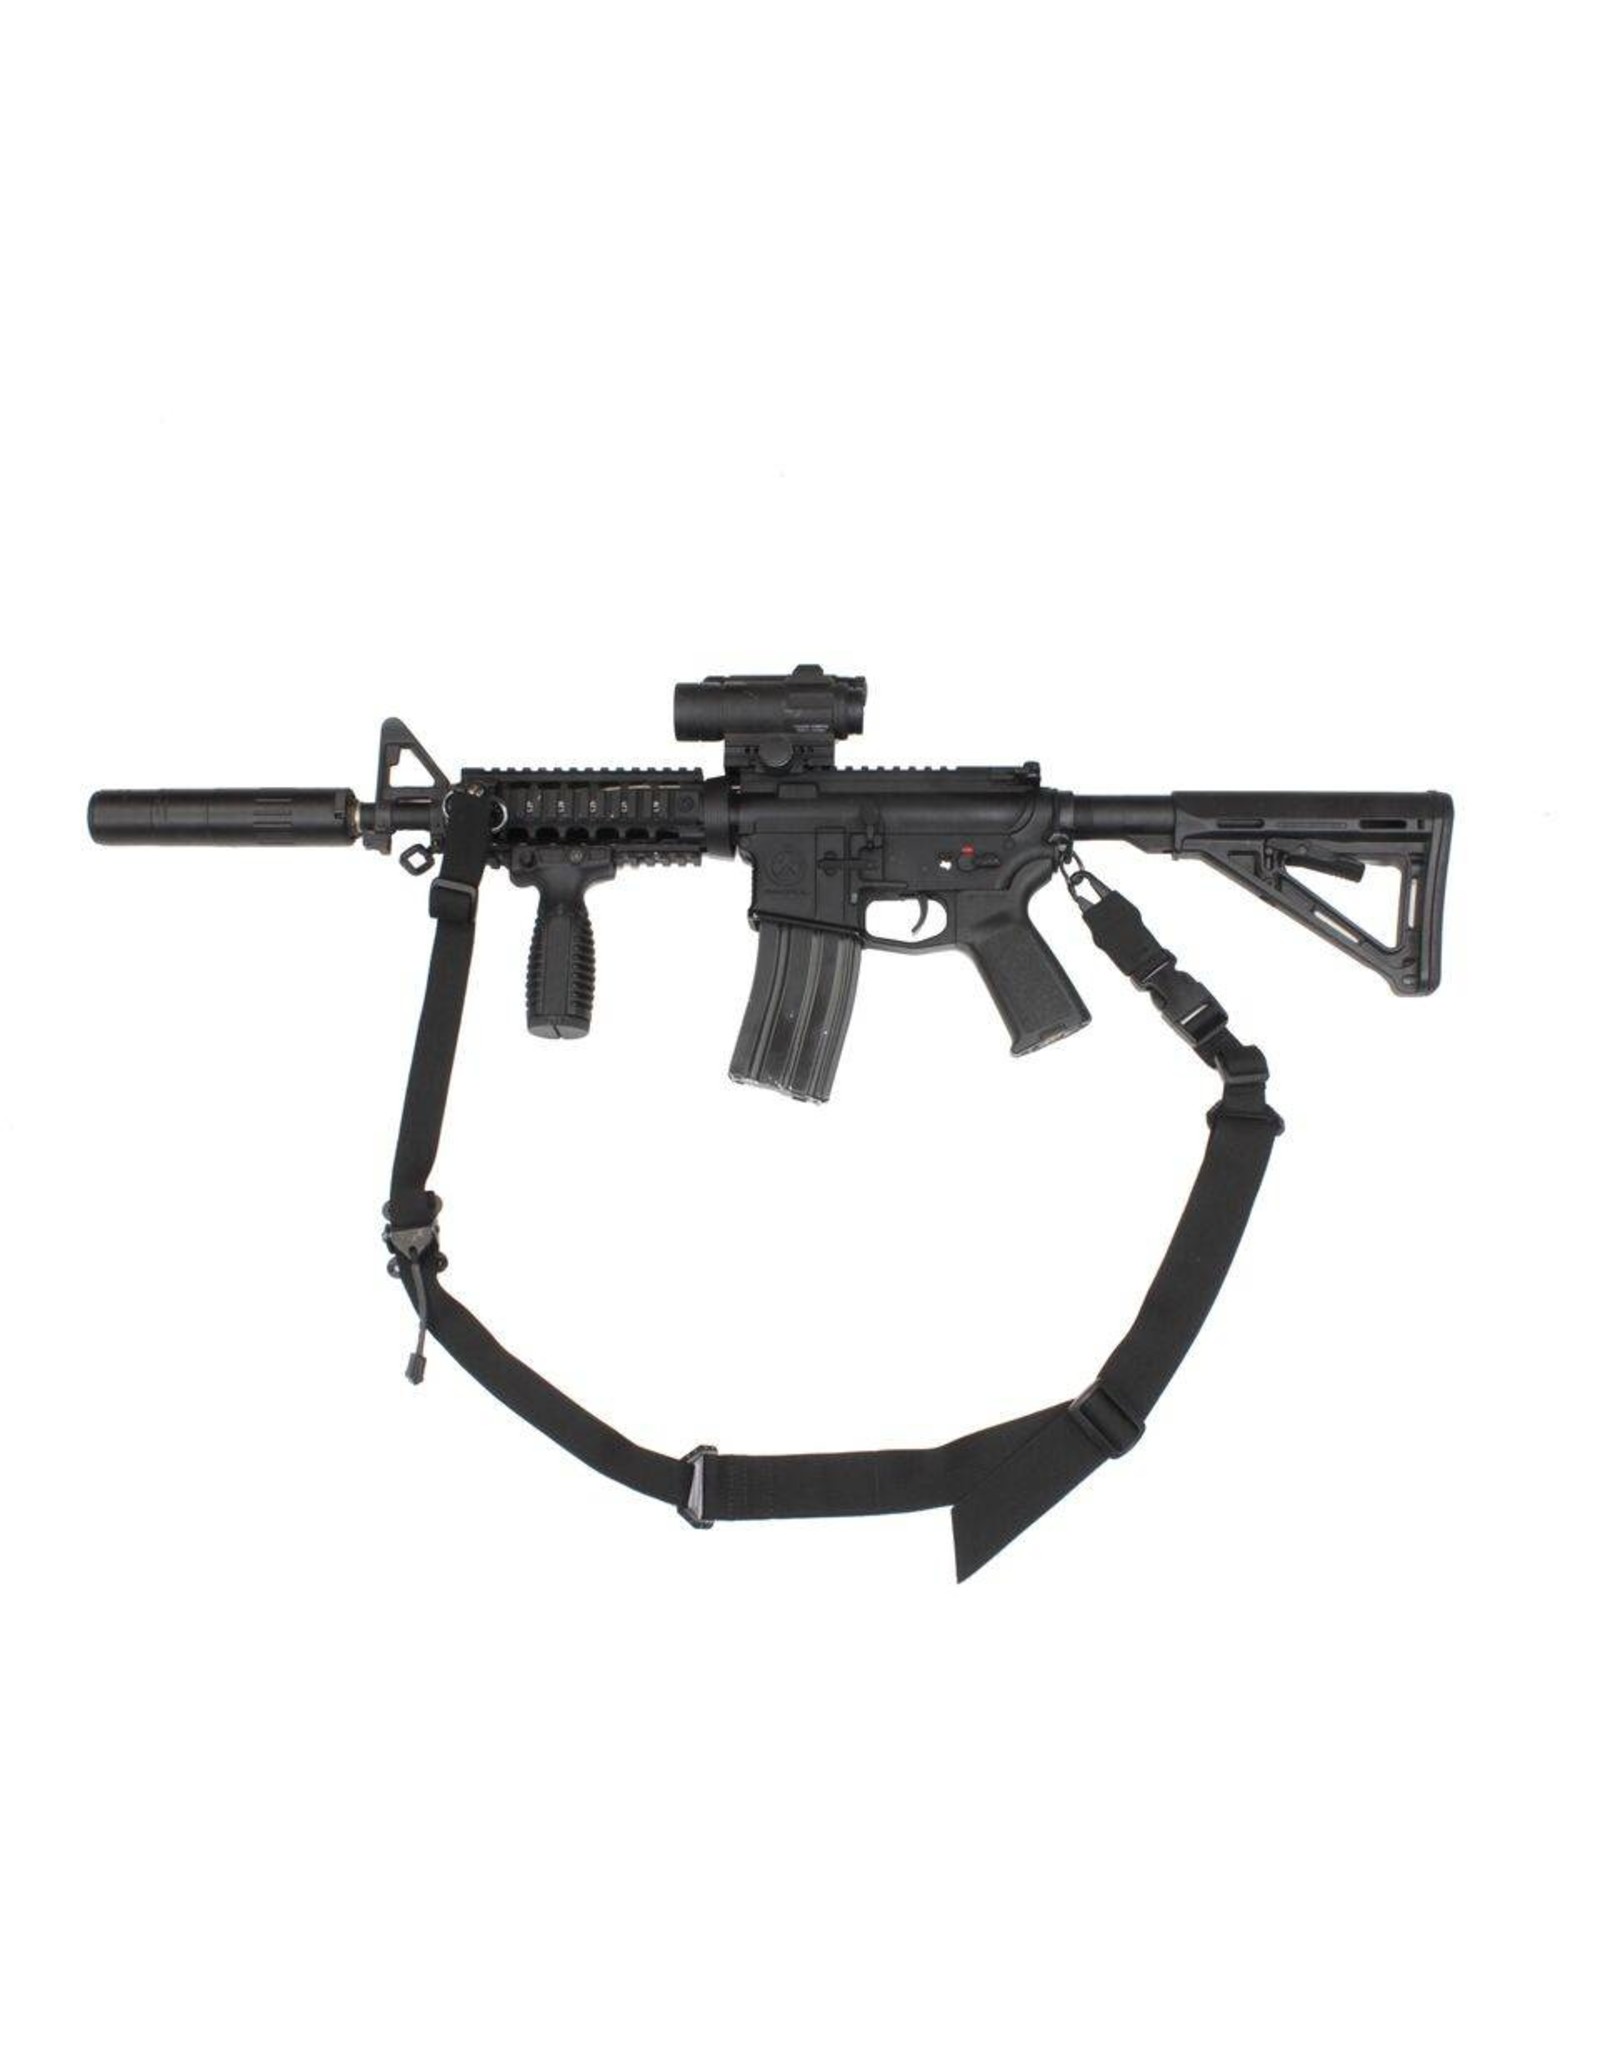 Warrior Two Point Weapon Sling - Black